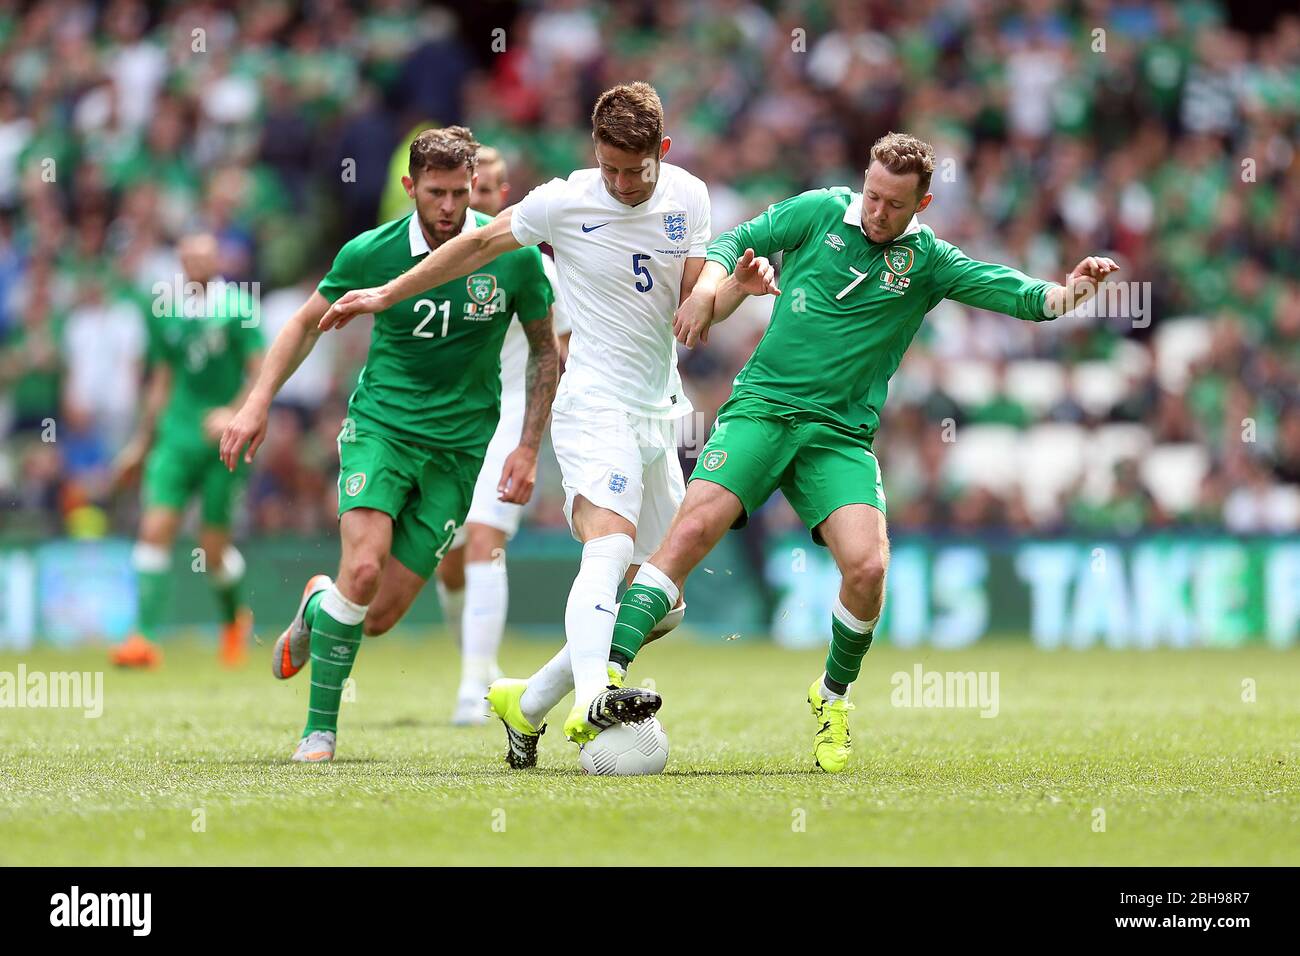 DUBLIN, REP OF IRELAND. Gary Cahill of England battles with Aiden McGeady of Ireland during the International Friendly match between the Republic of Ireland & England at the Aviva Stadium, Dublin, Ireland on Sunday June 7th 2015 (Credit: MI News) Stock Photo